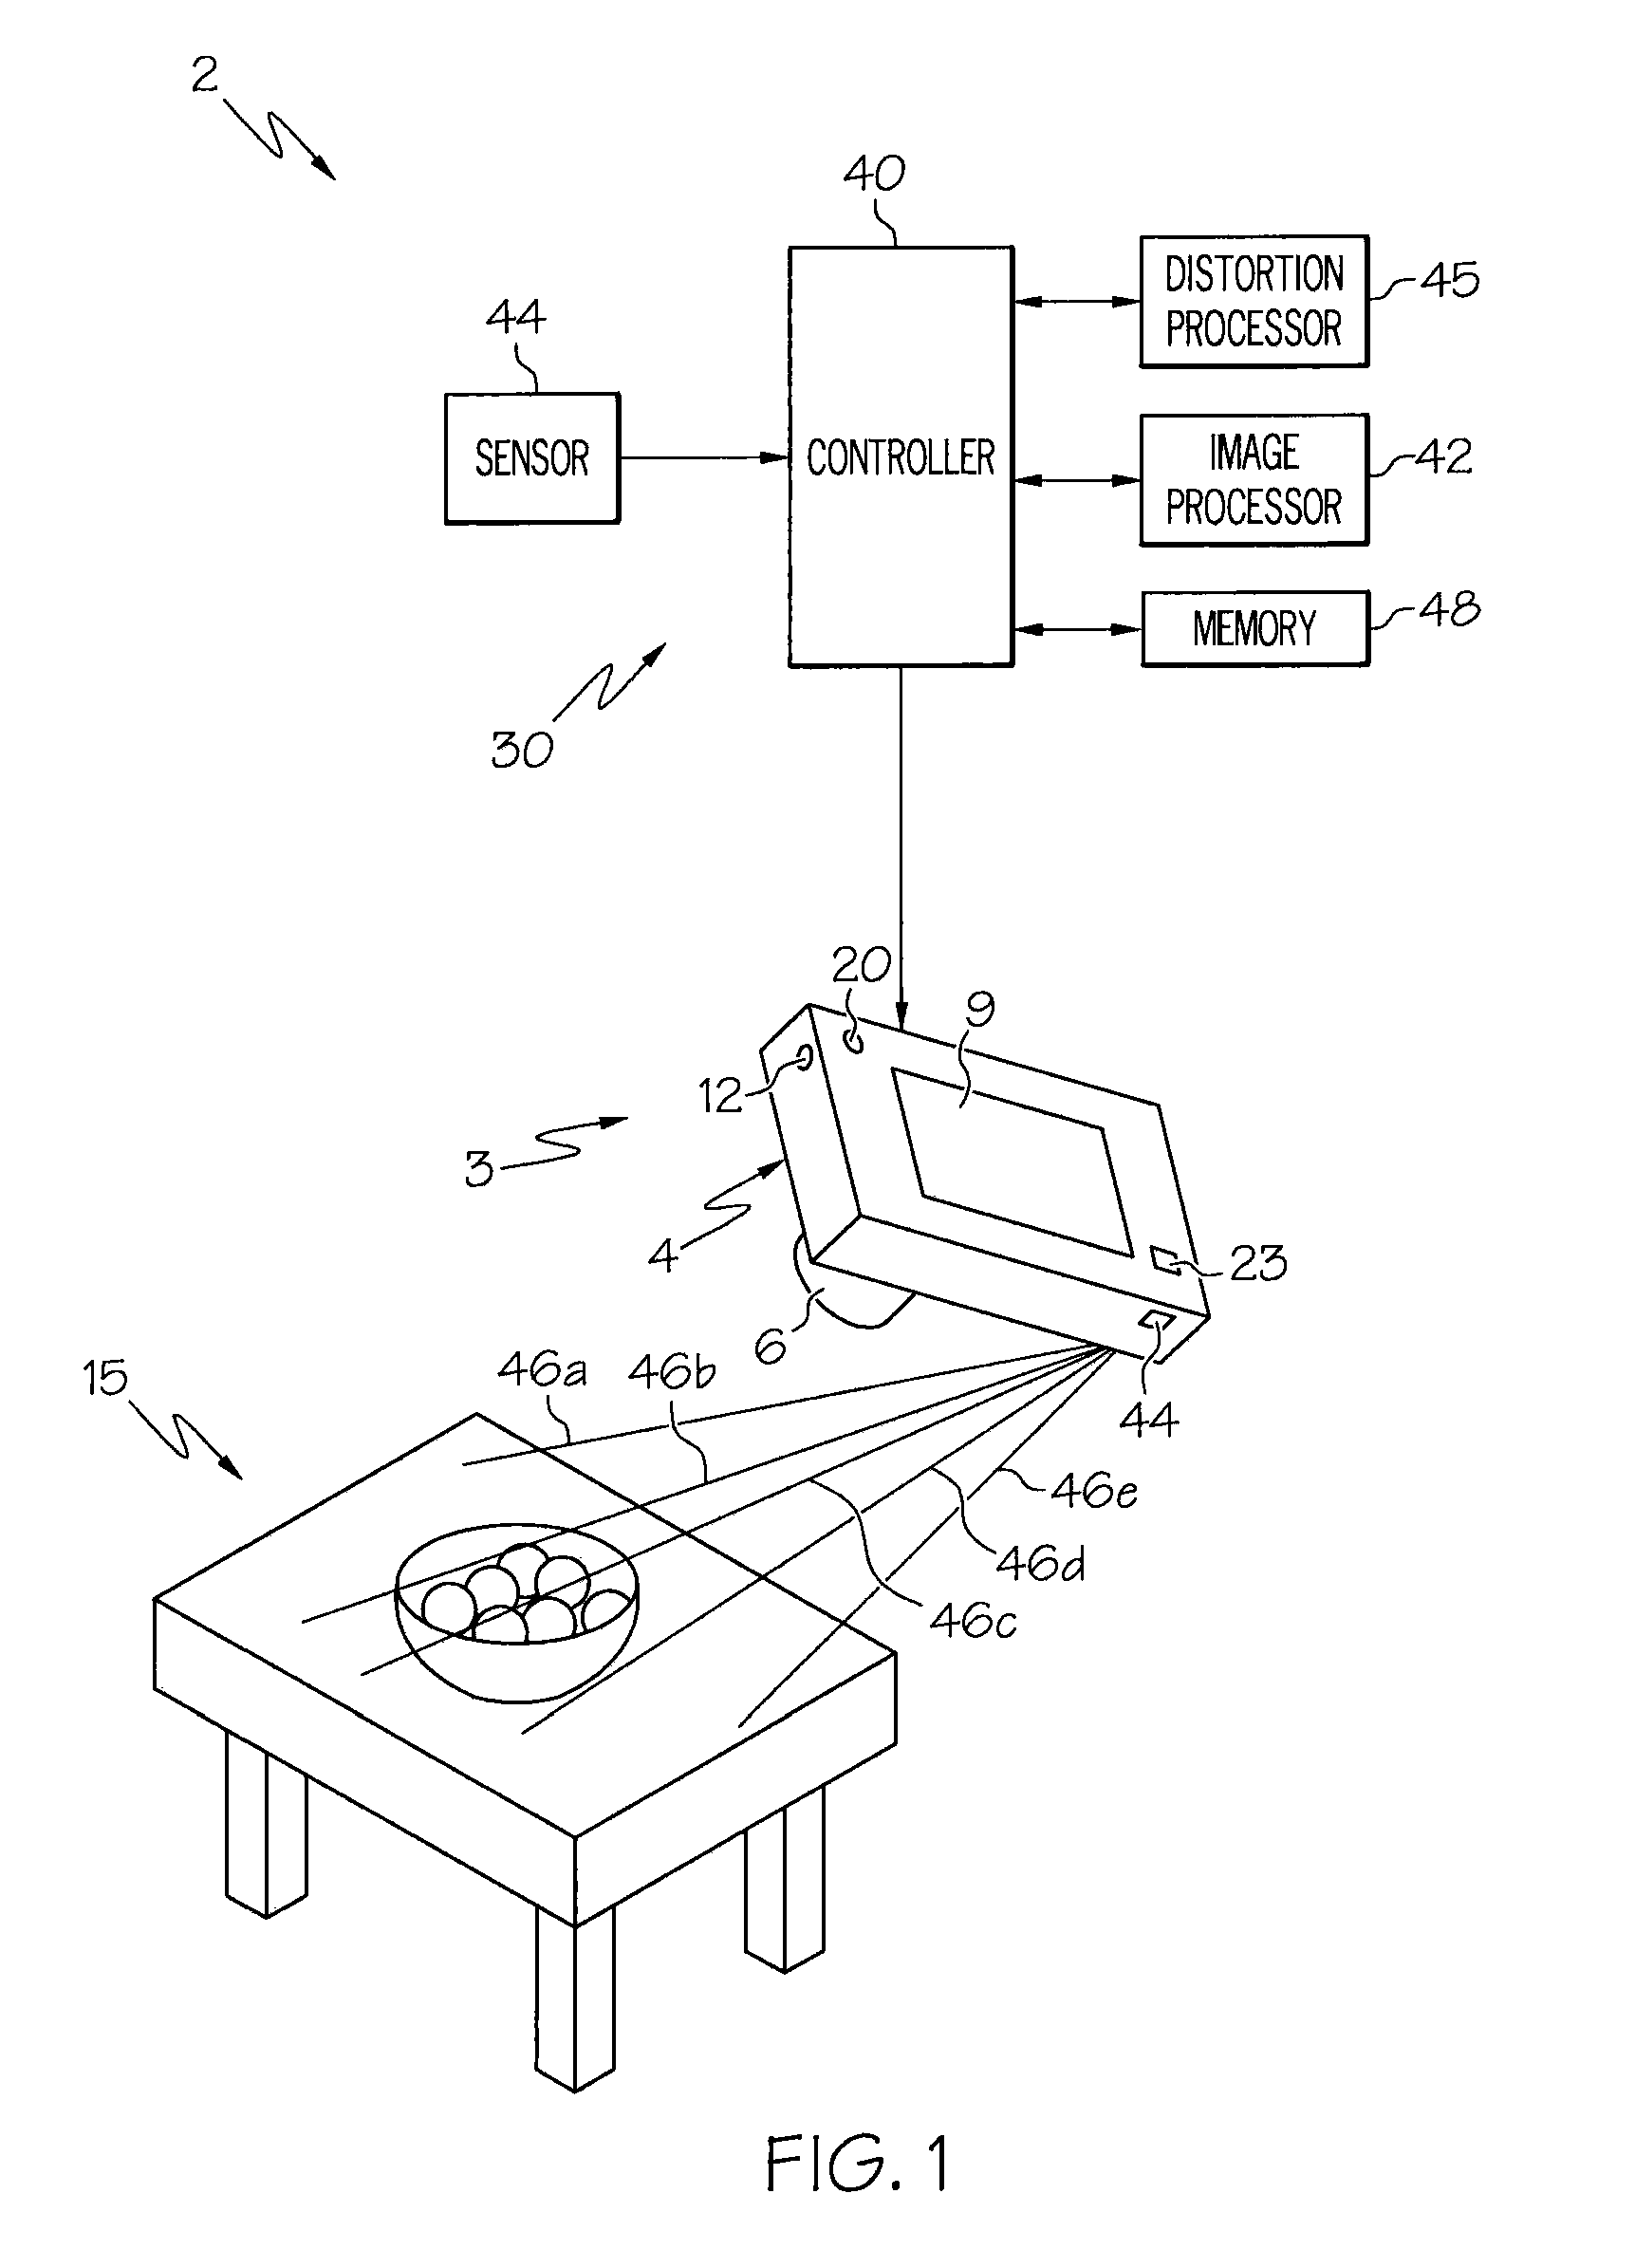 Method of correcting distortions in digital images captured by a digital camera system